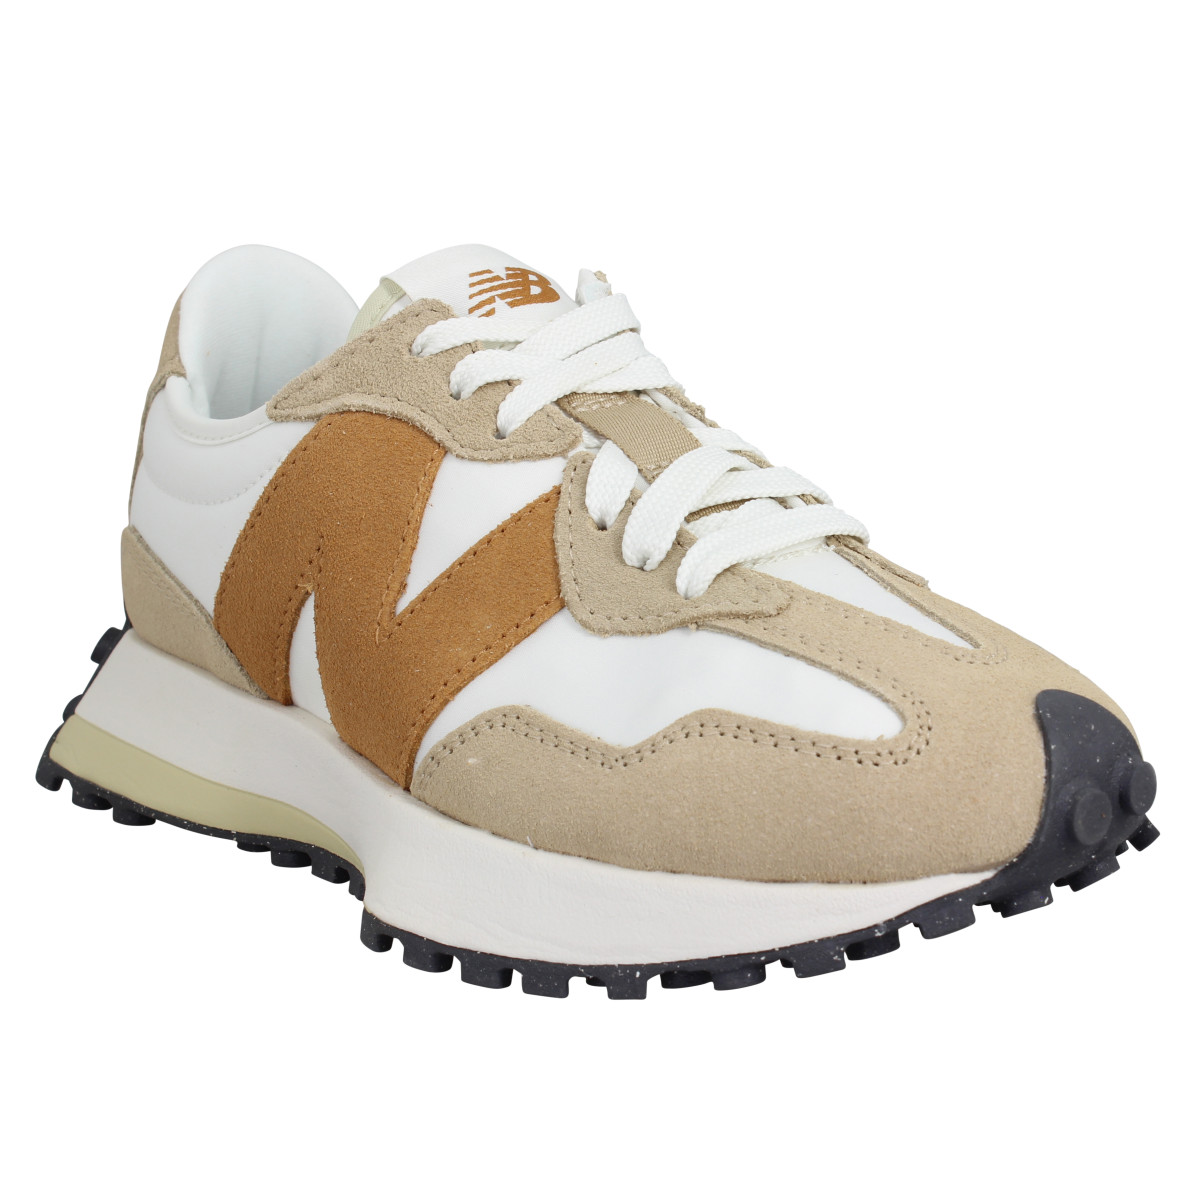 Baskets NEW BALANCE 327 velours toile Femme Tabacco